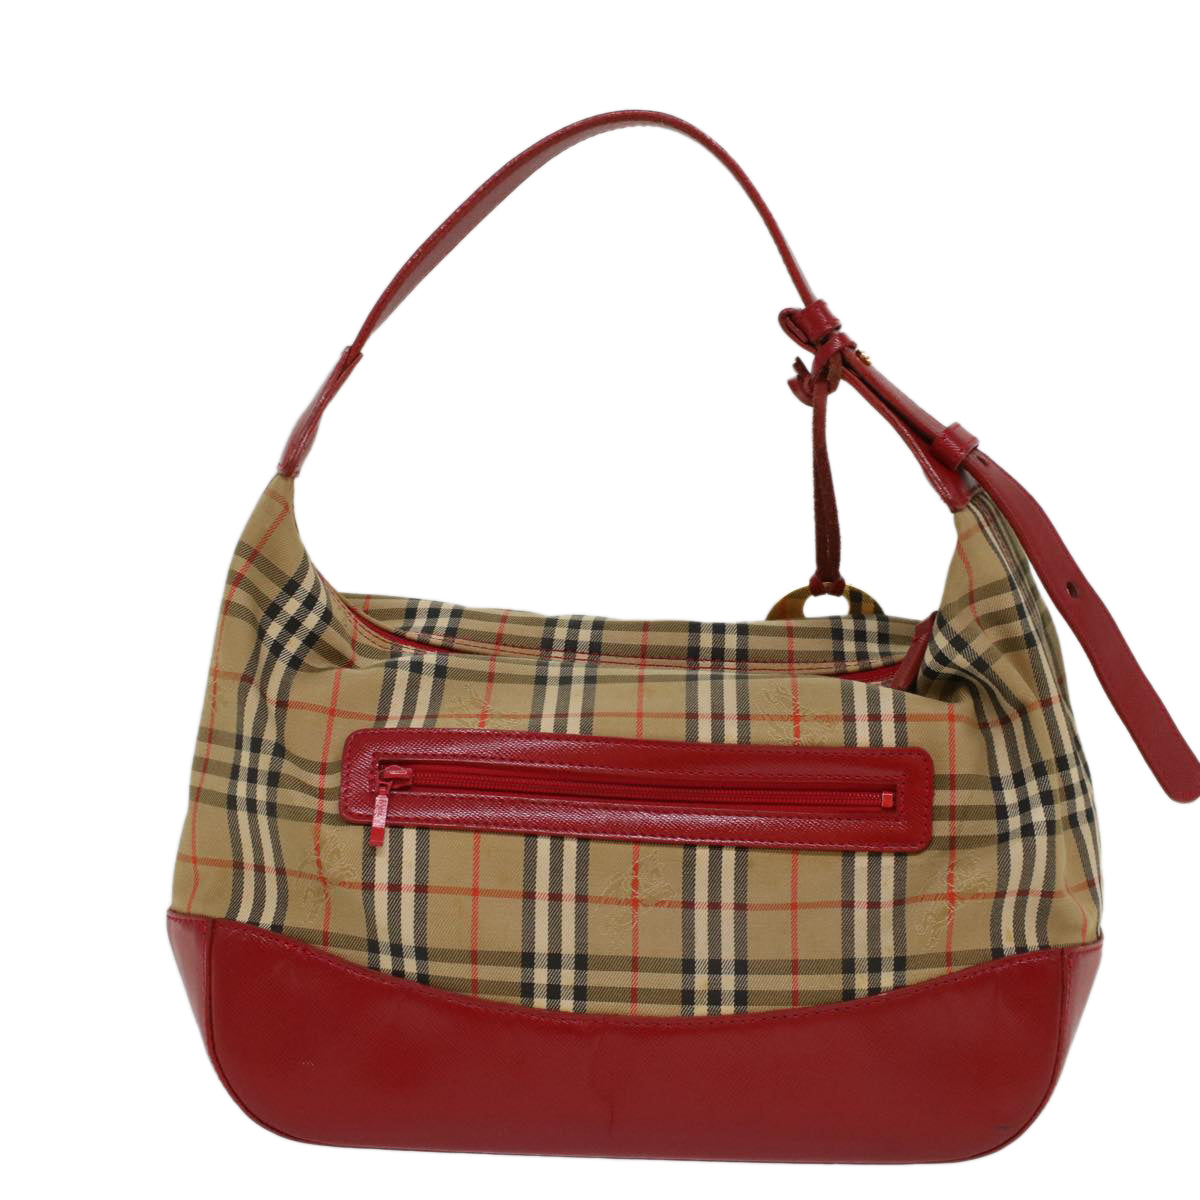 Burberrys Nova Check Hand Bag Canvas Leather Beige Red Auth 53395 - 0